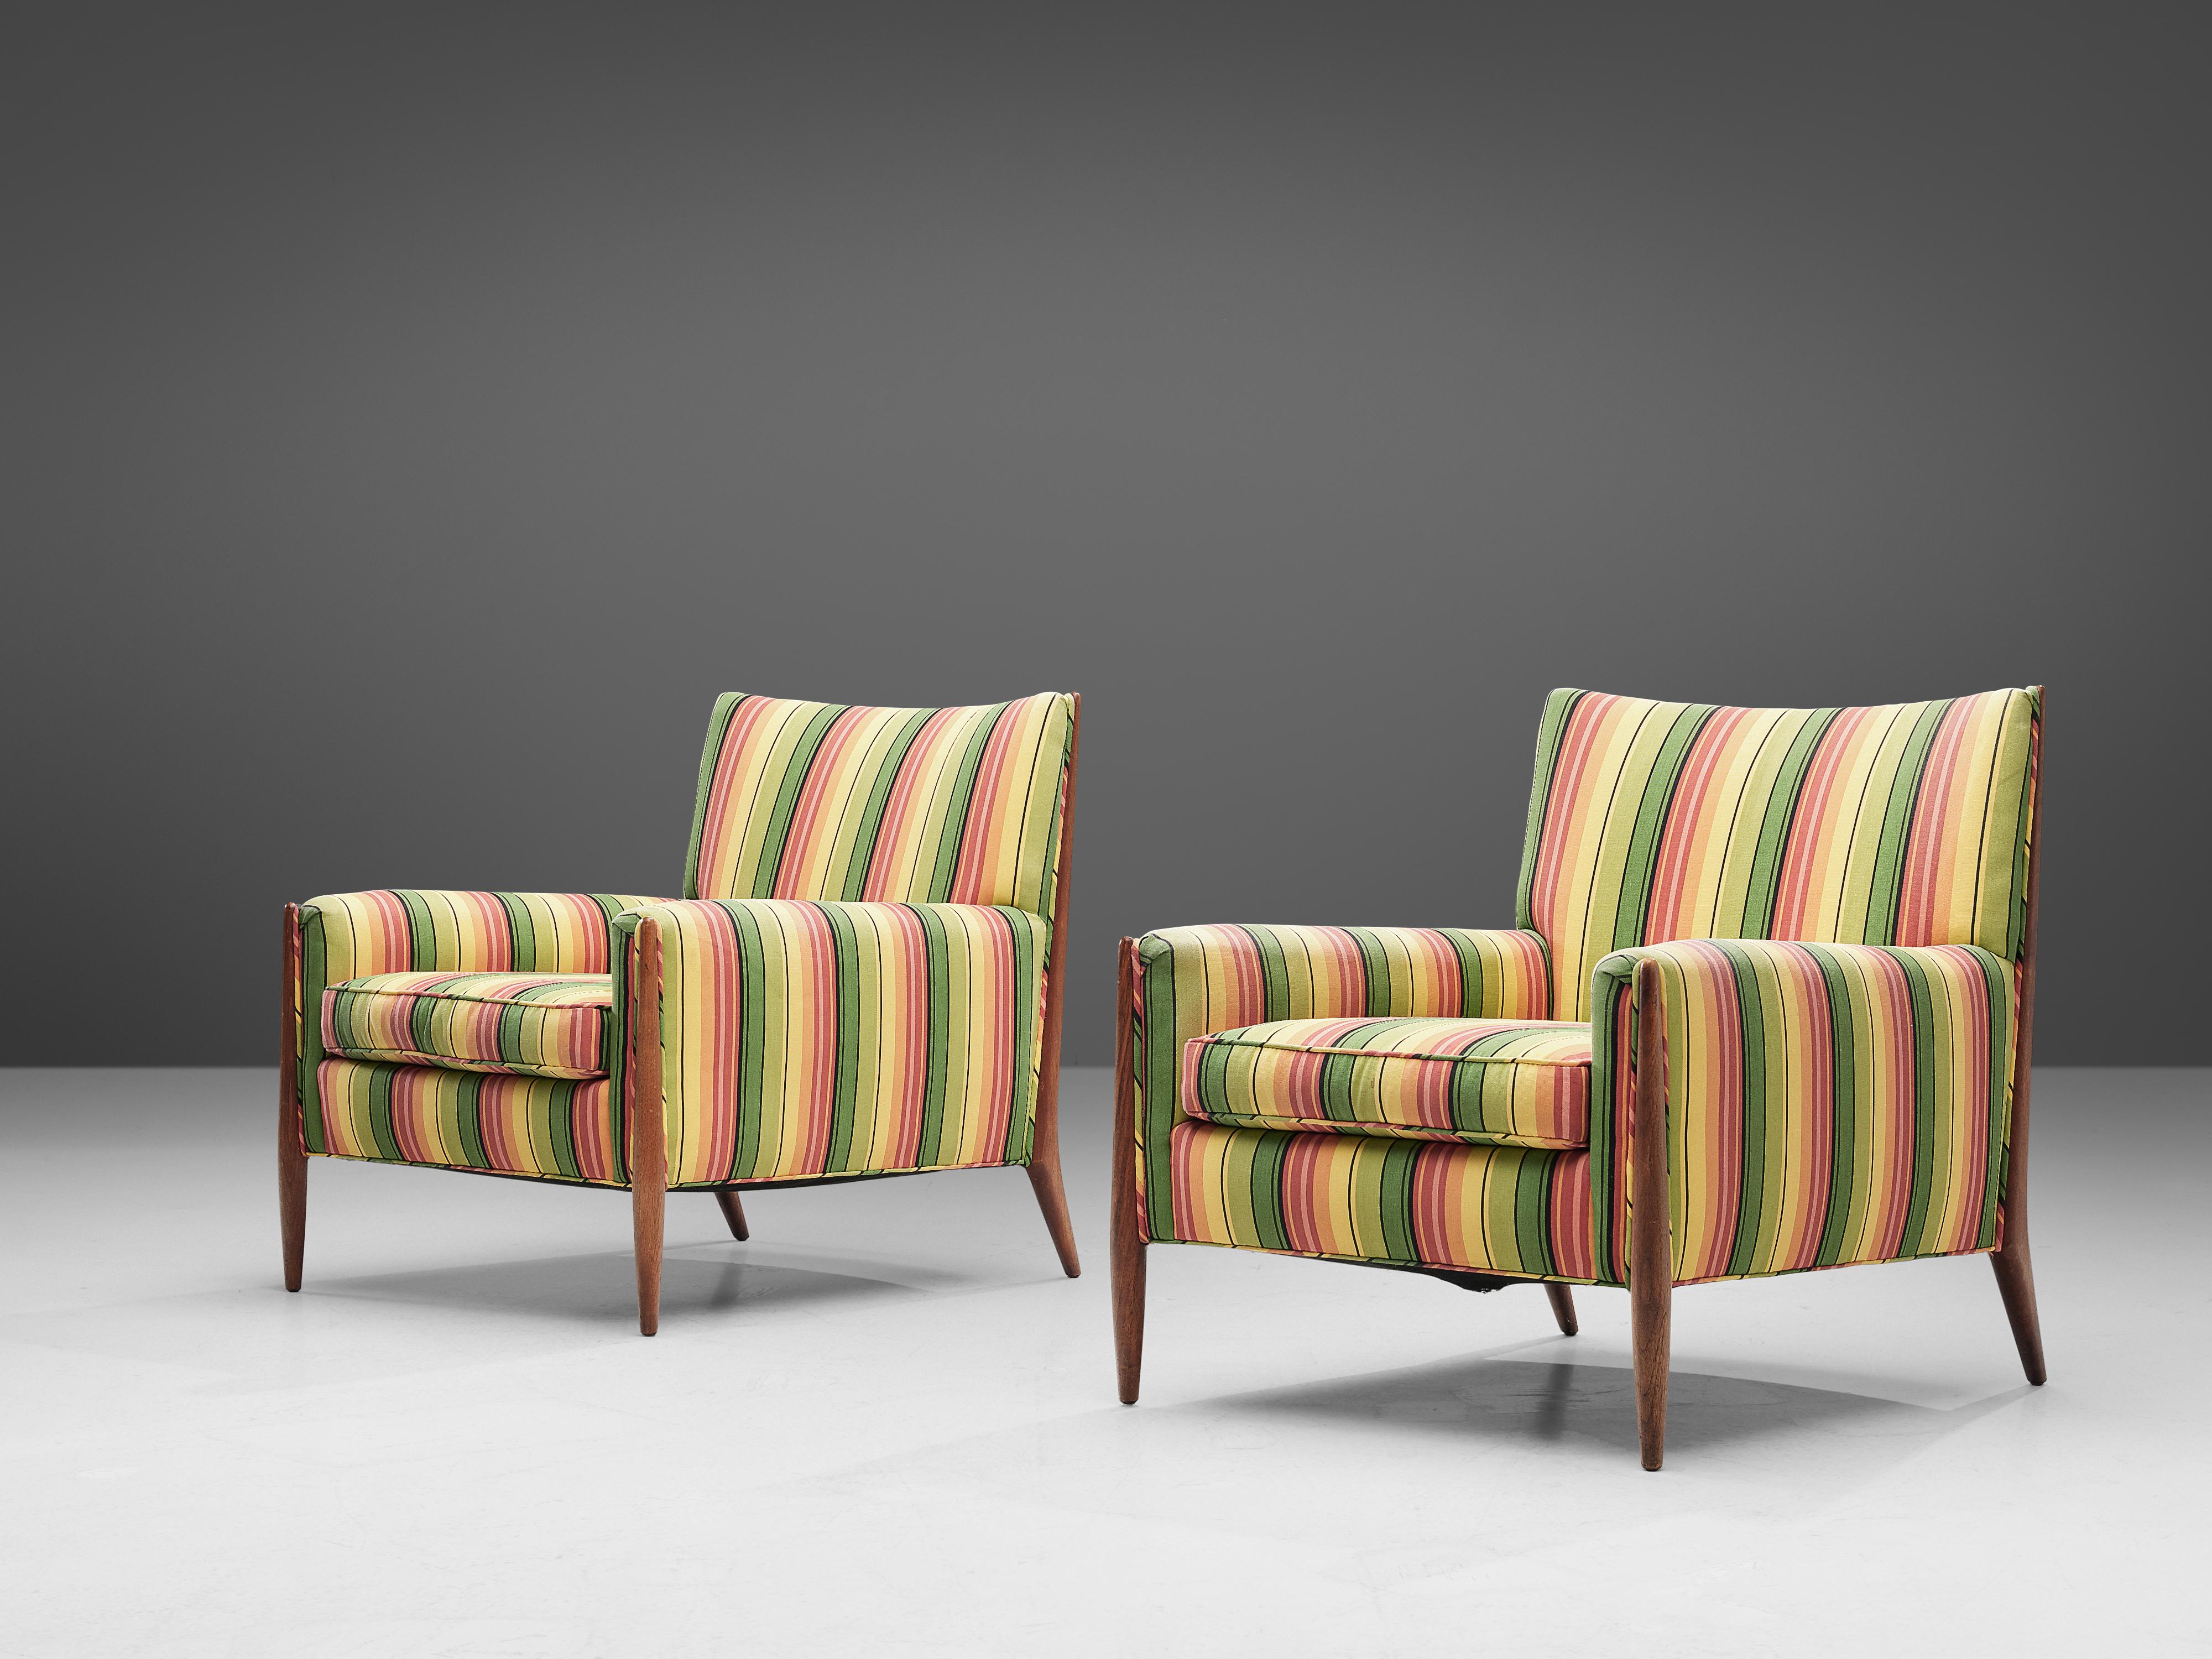 Jules Heumann, lounge chairs, colorful striped fabric, walnut, United States, 1960s

Classic midcentury lounge chairs by the American designer Jules Heumann for Metropolitan Furniture. Notable are the legs with rise high up and add a nice detail